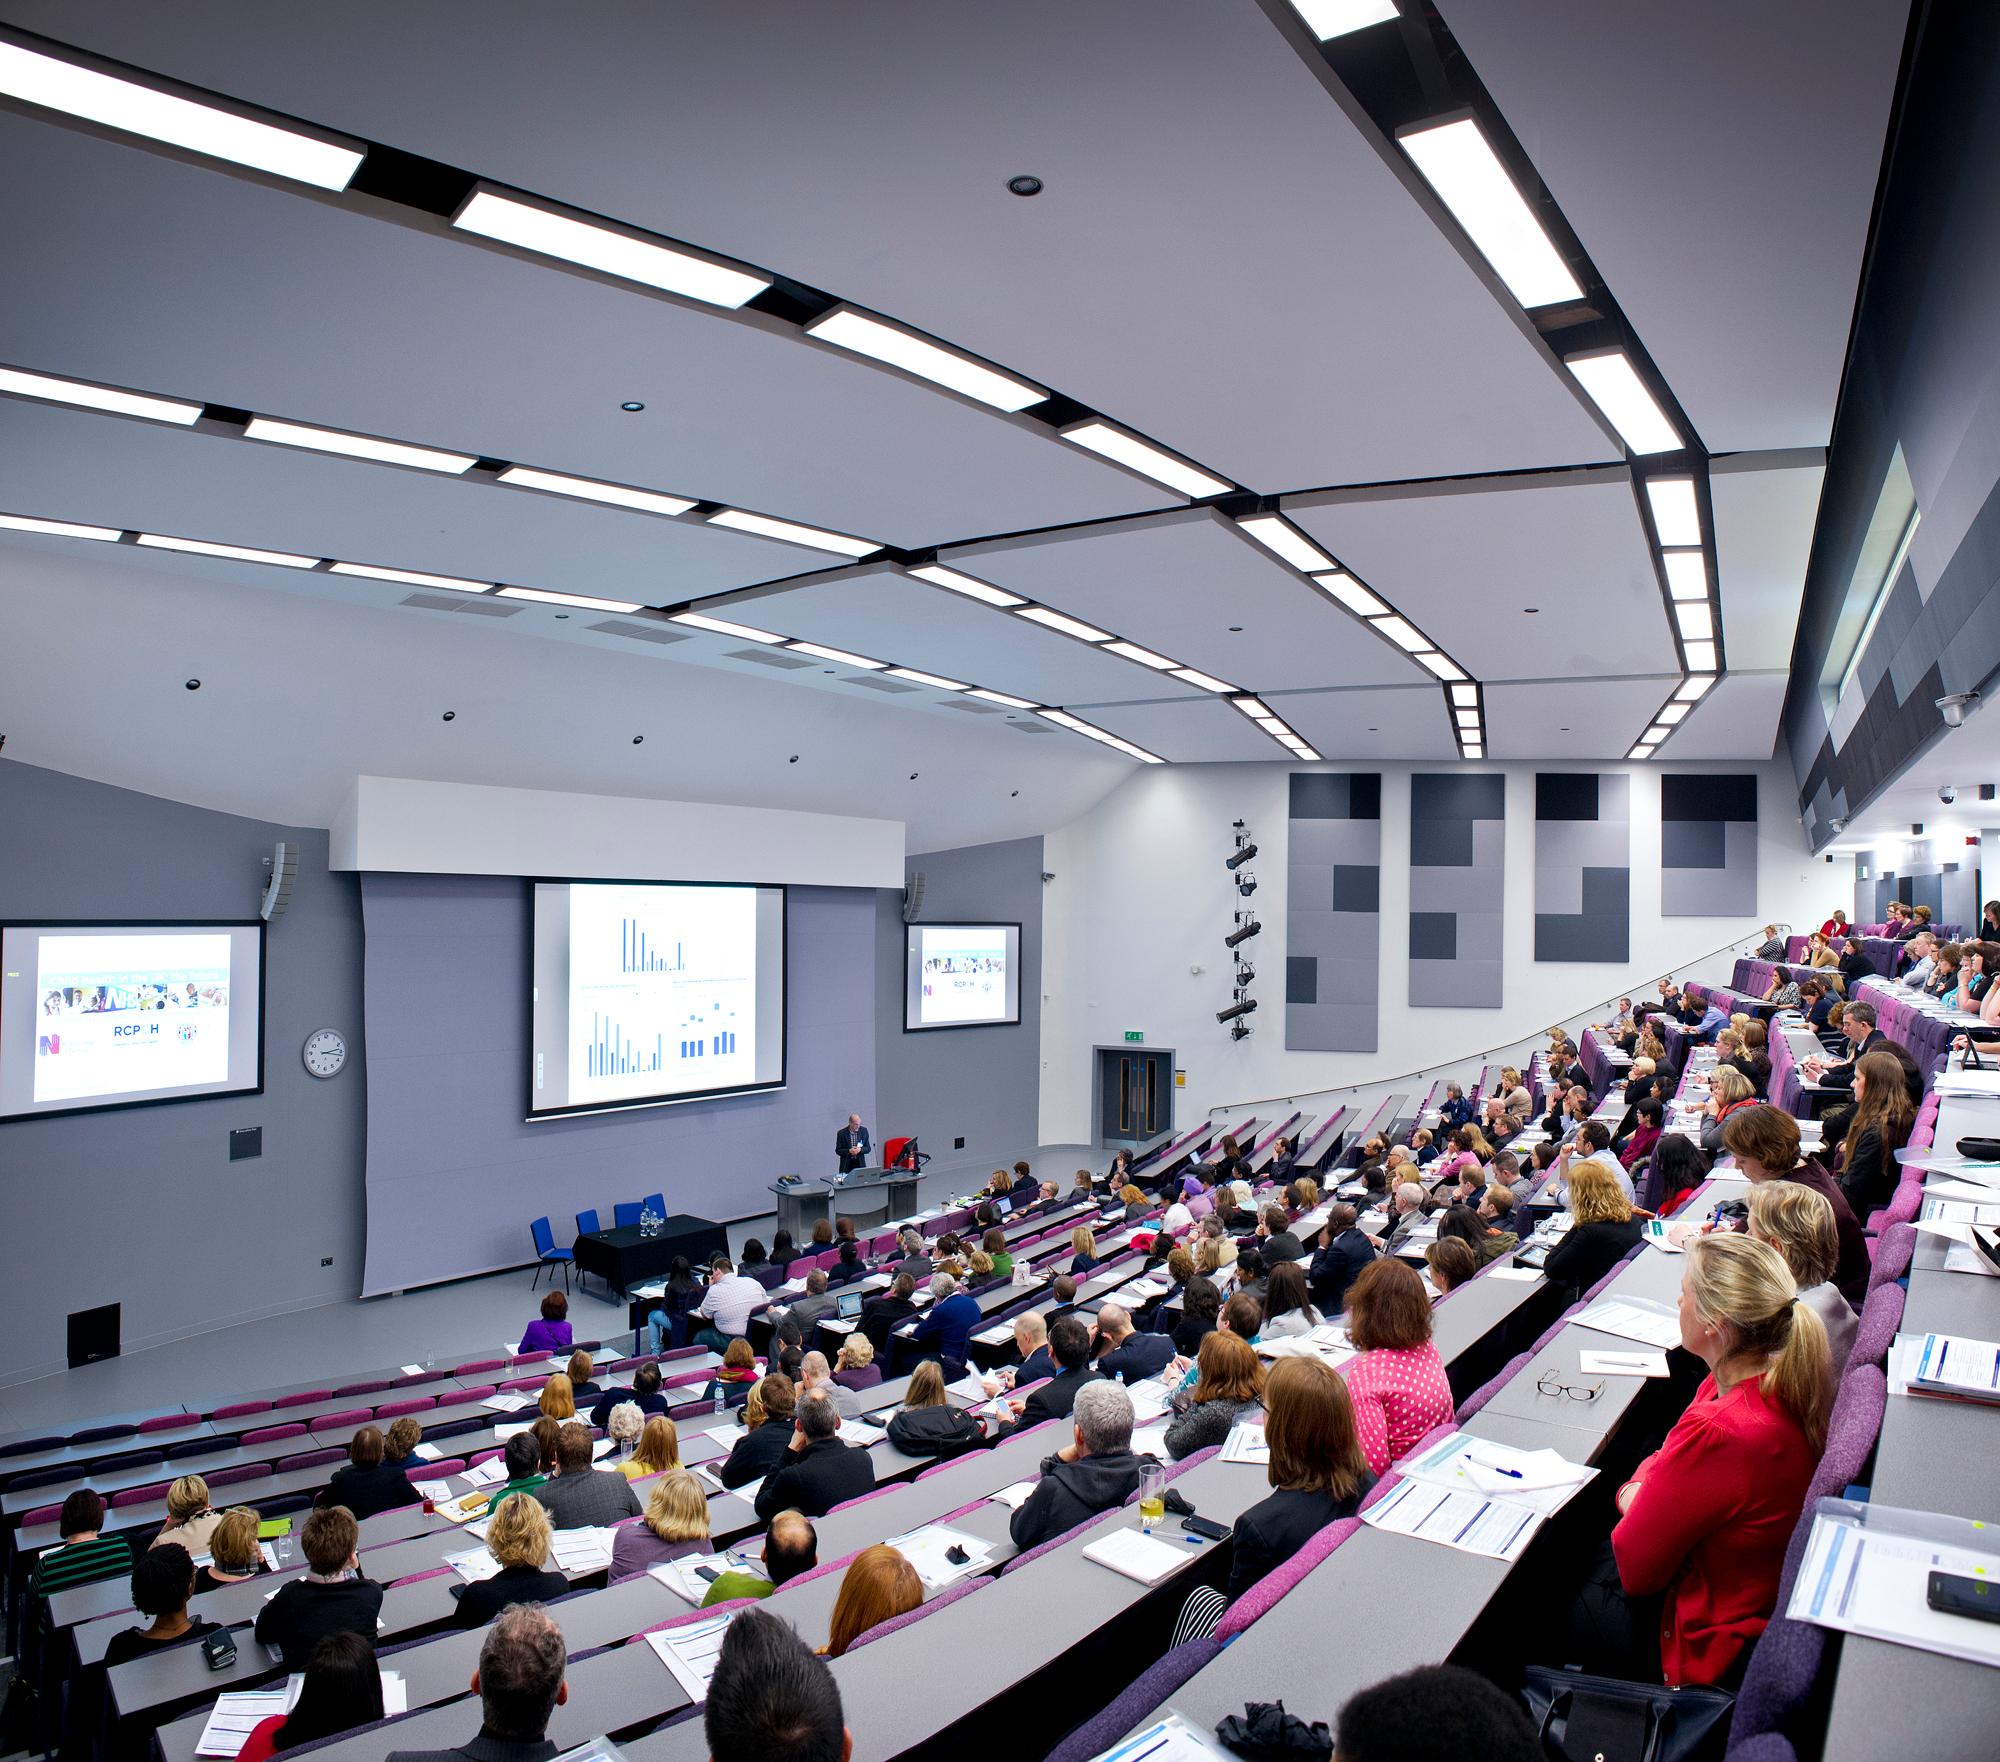 The University Of Manchester Conferences And Venues, University Place Theatre A/b
   photo #1